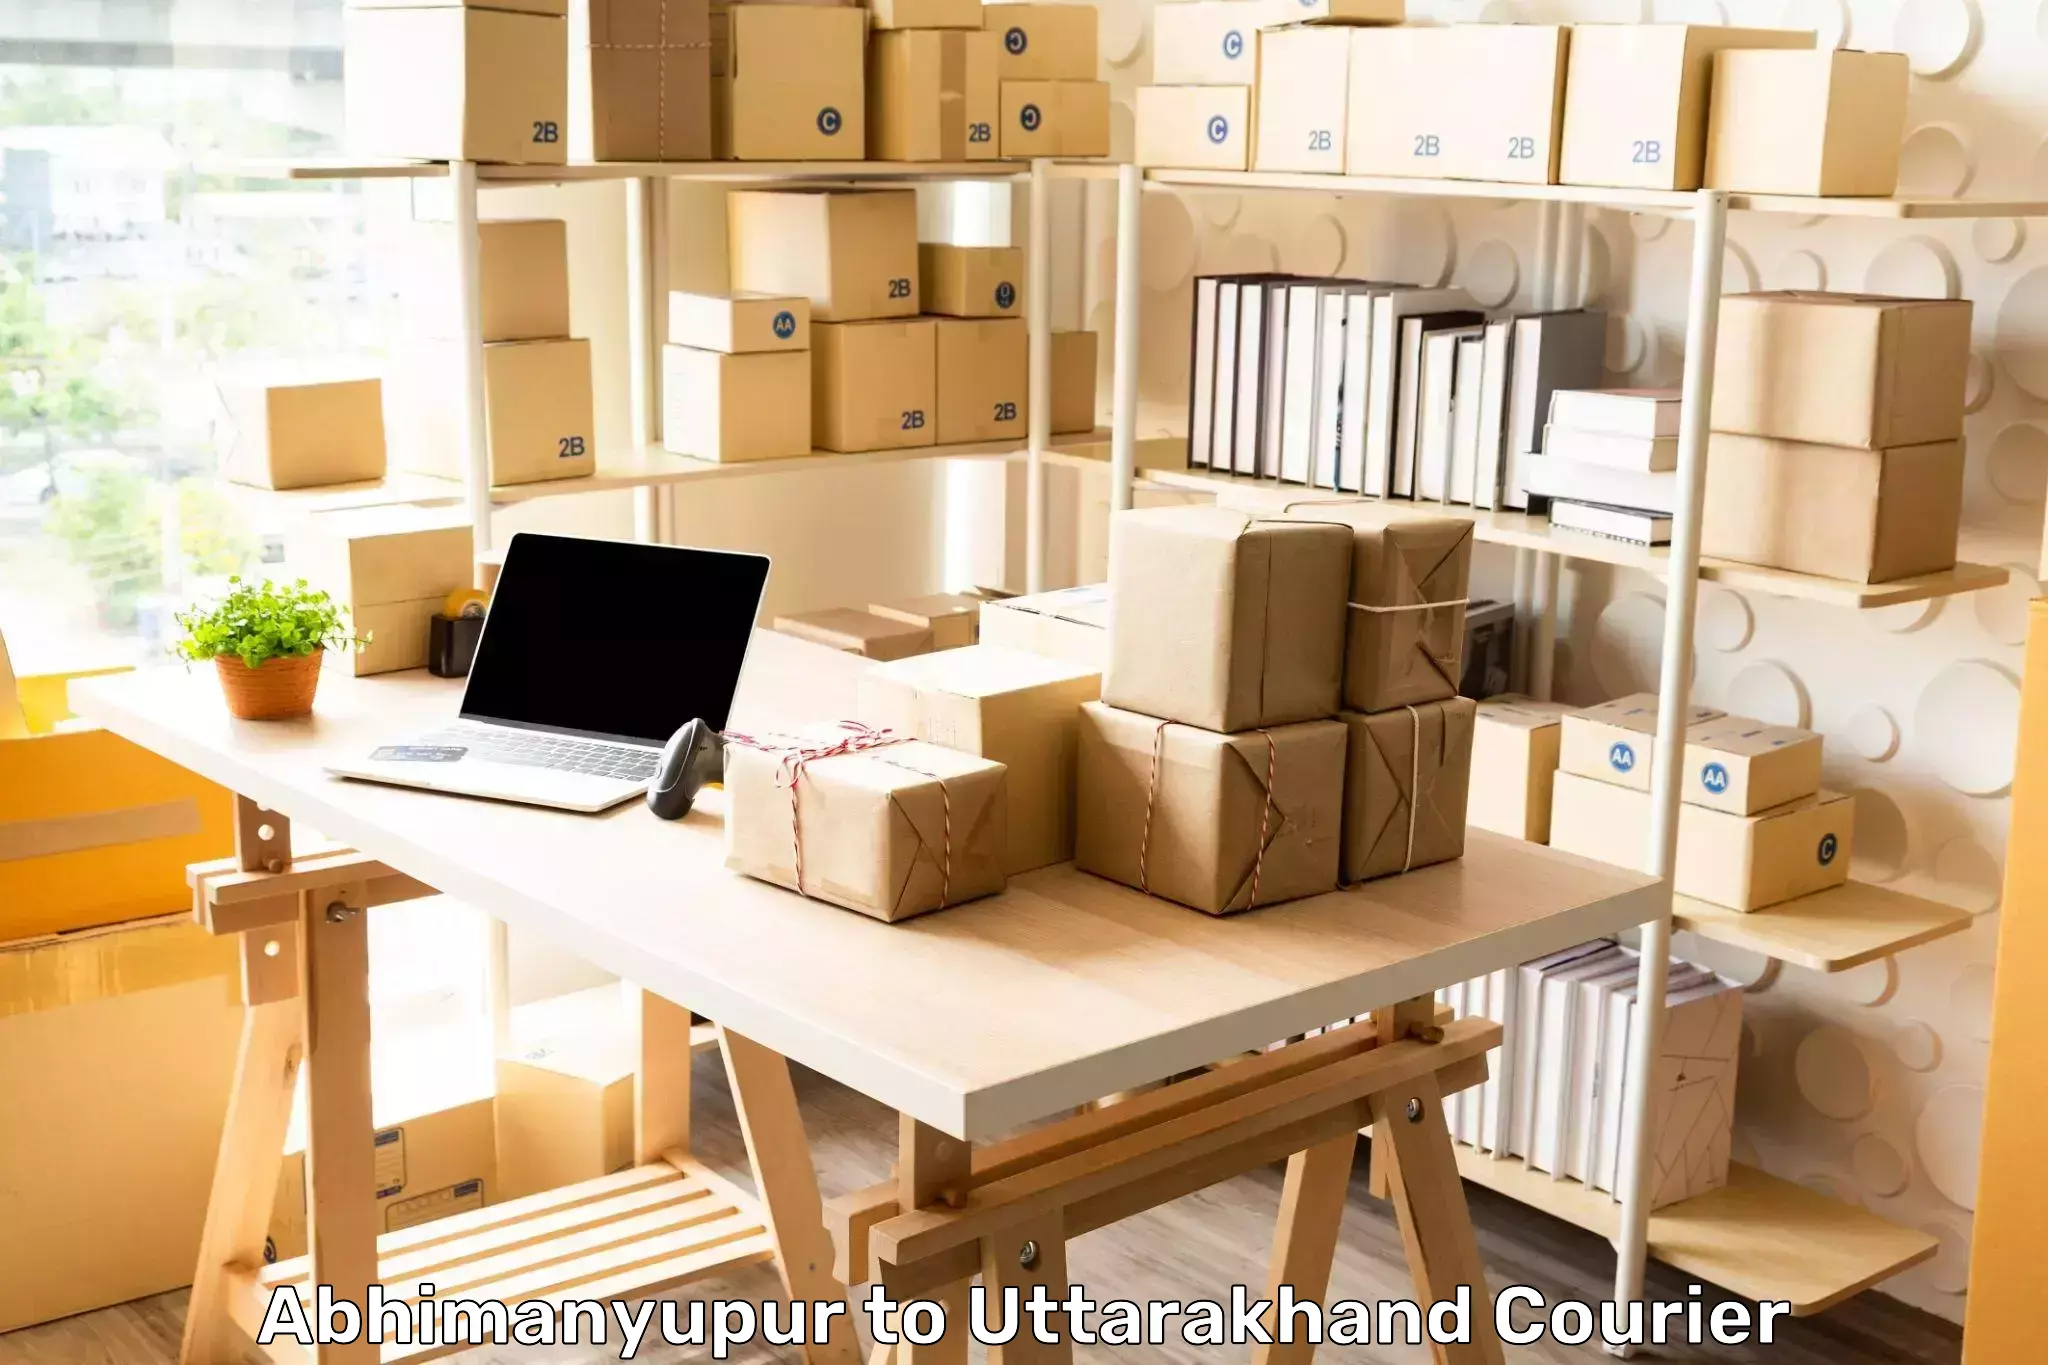 State-of-the-art courier technology Abhimanyupur to Uttarkashi